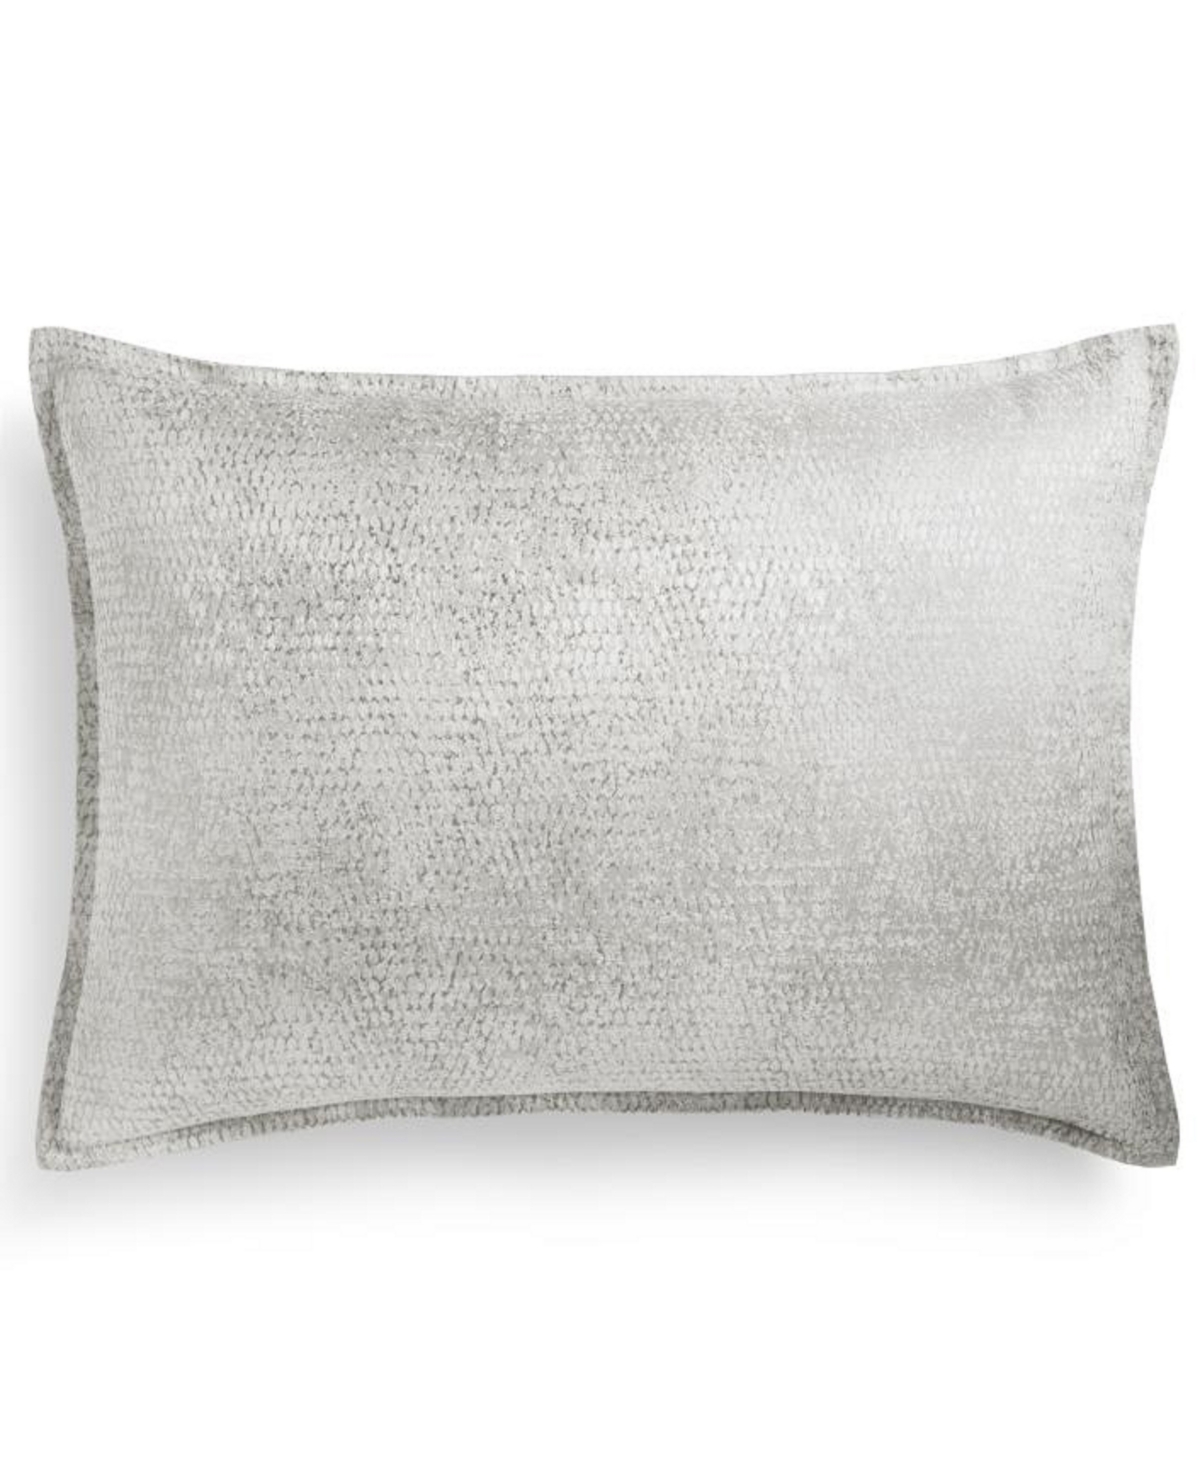 Closeout! Hotel Collection Tessellate Sham, Standard, Created for Macy's - Light Gray